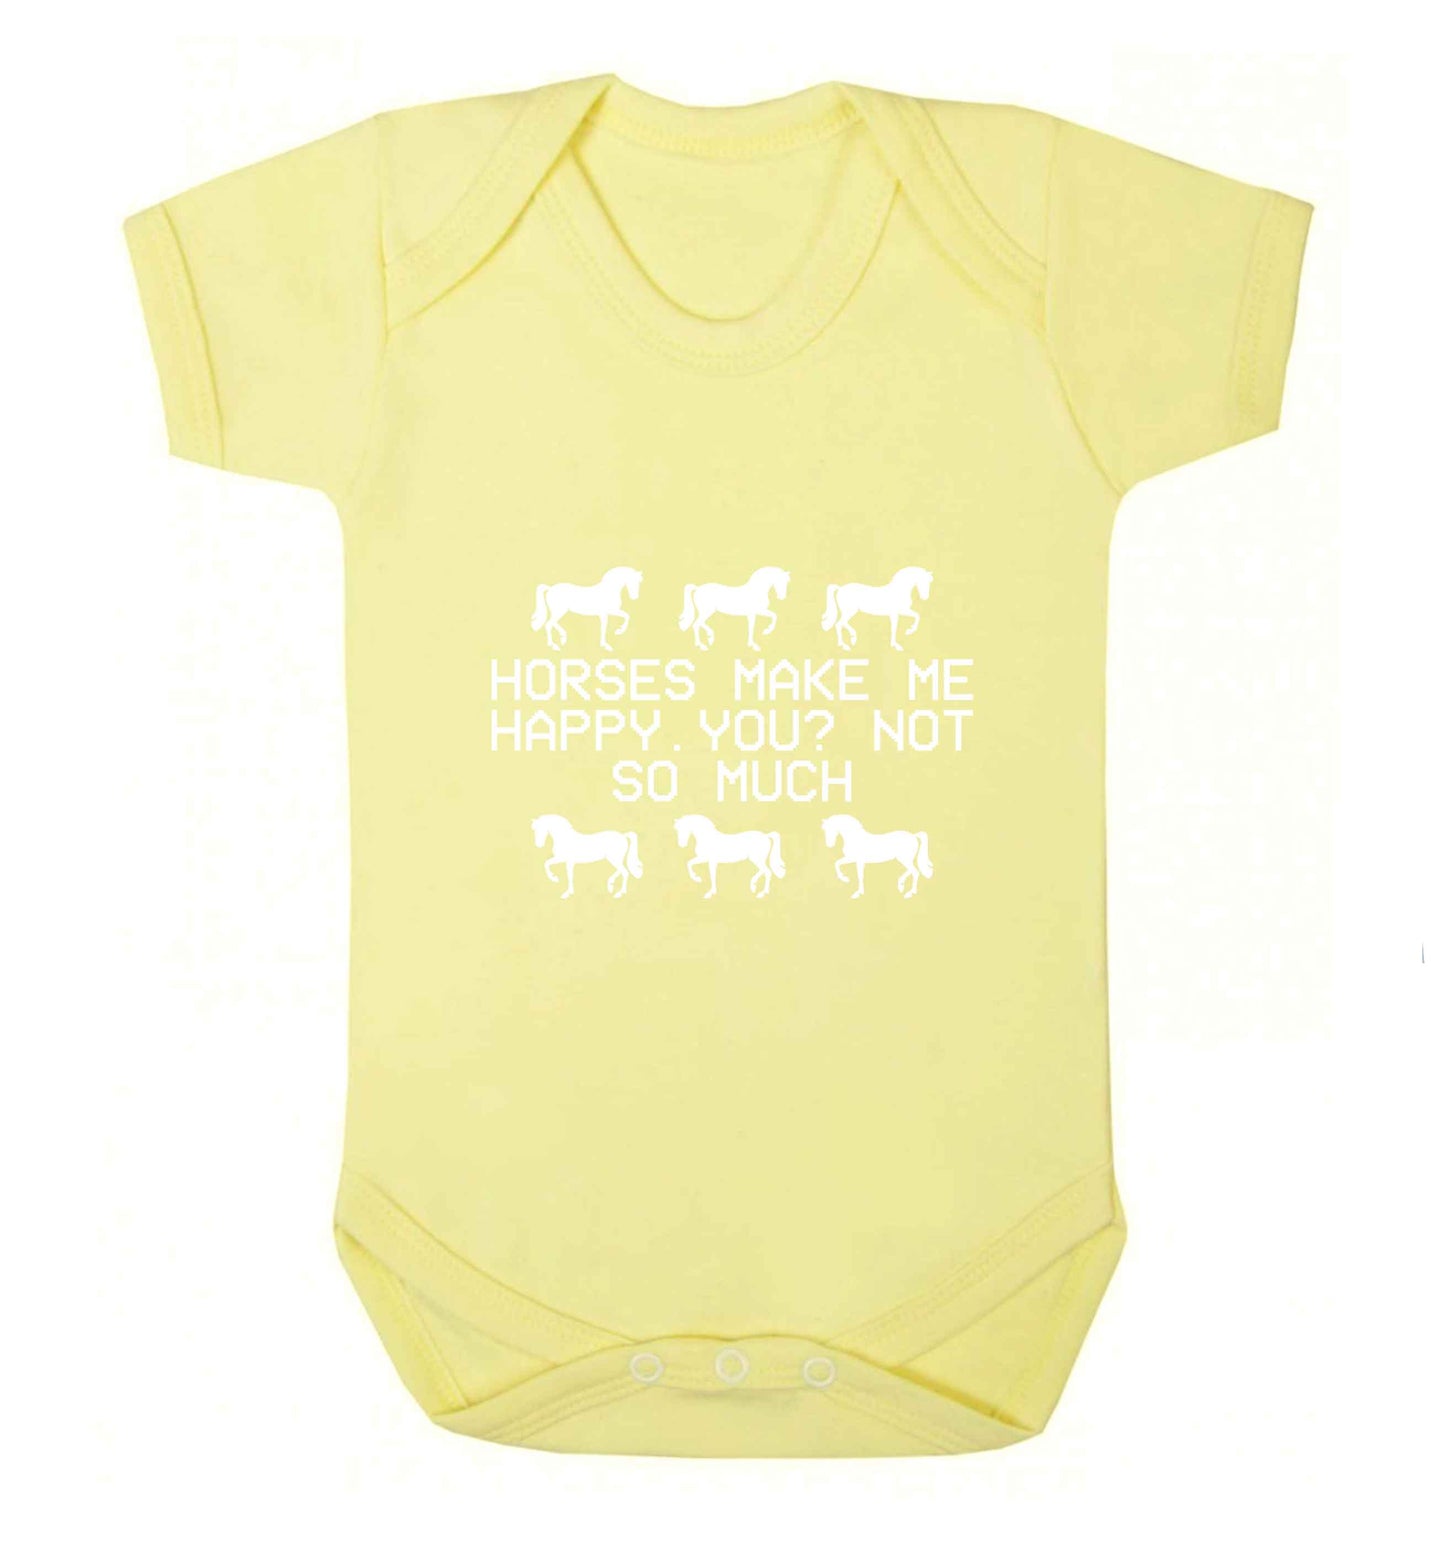 Horses make me happy, you not so much baby vest pale yellow 18-24 months